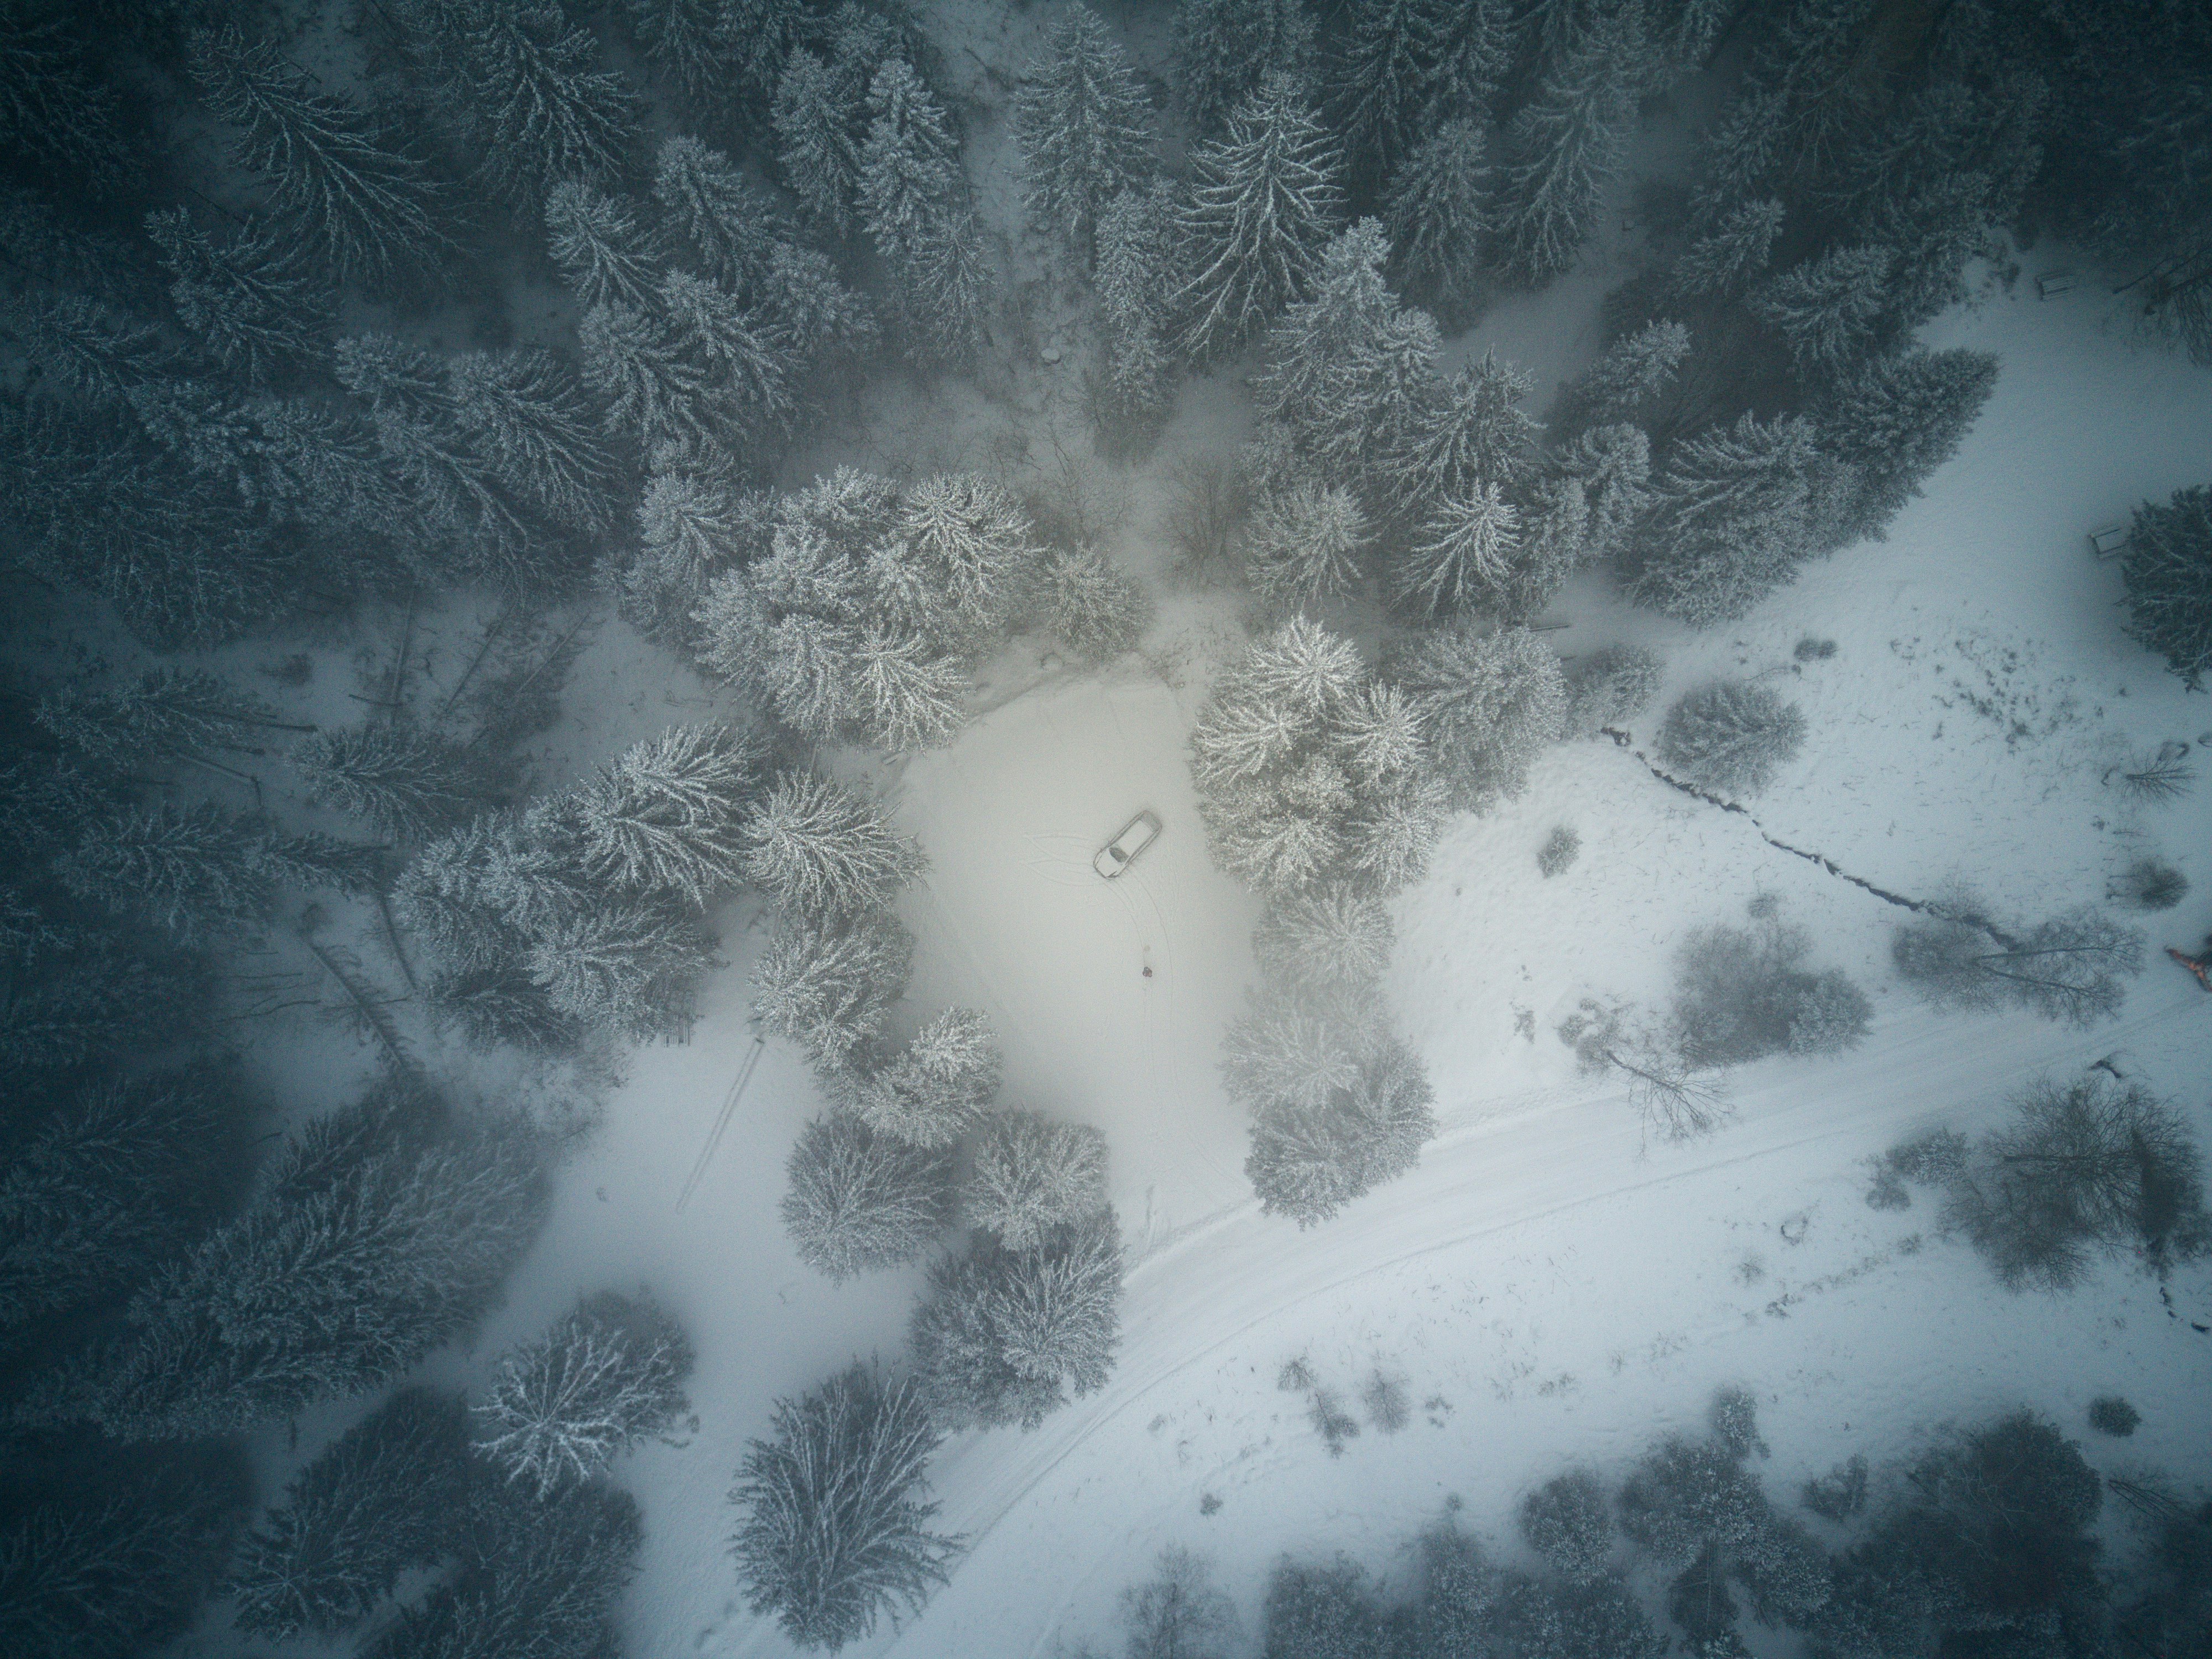 I took this picture with my drone during winter.
Mavic Pro, Audi A6, shot in Chamrousse, France.